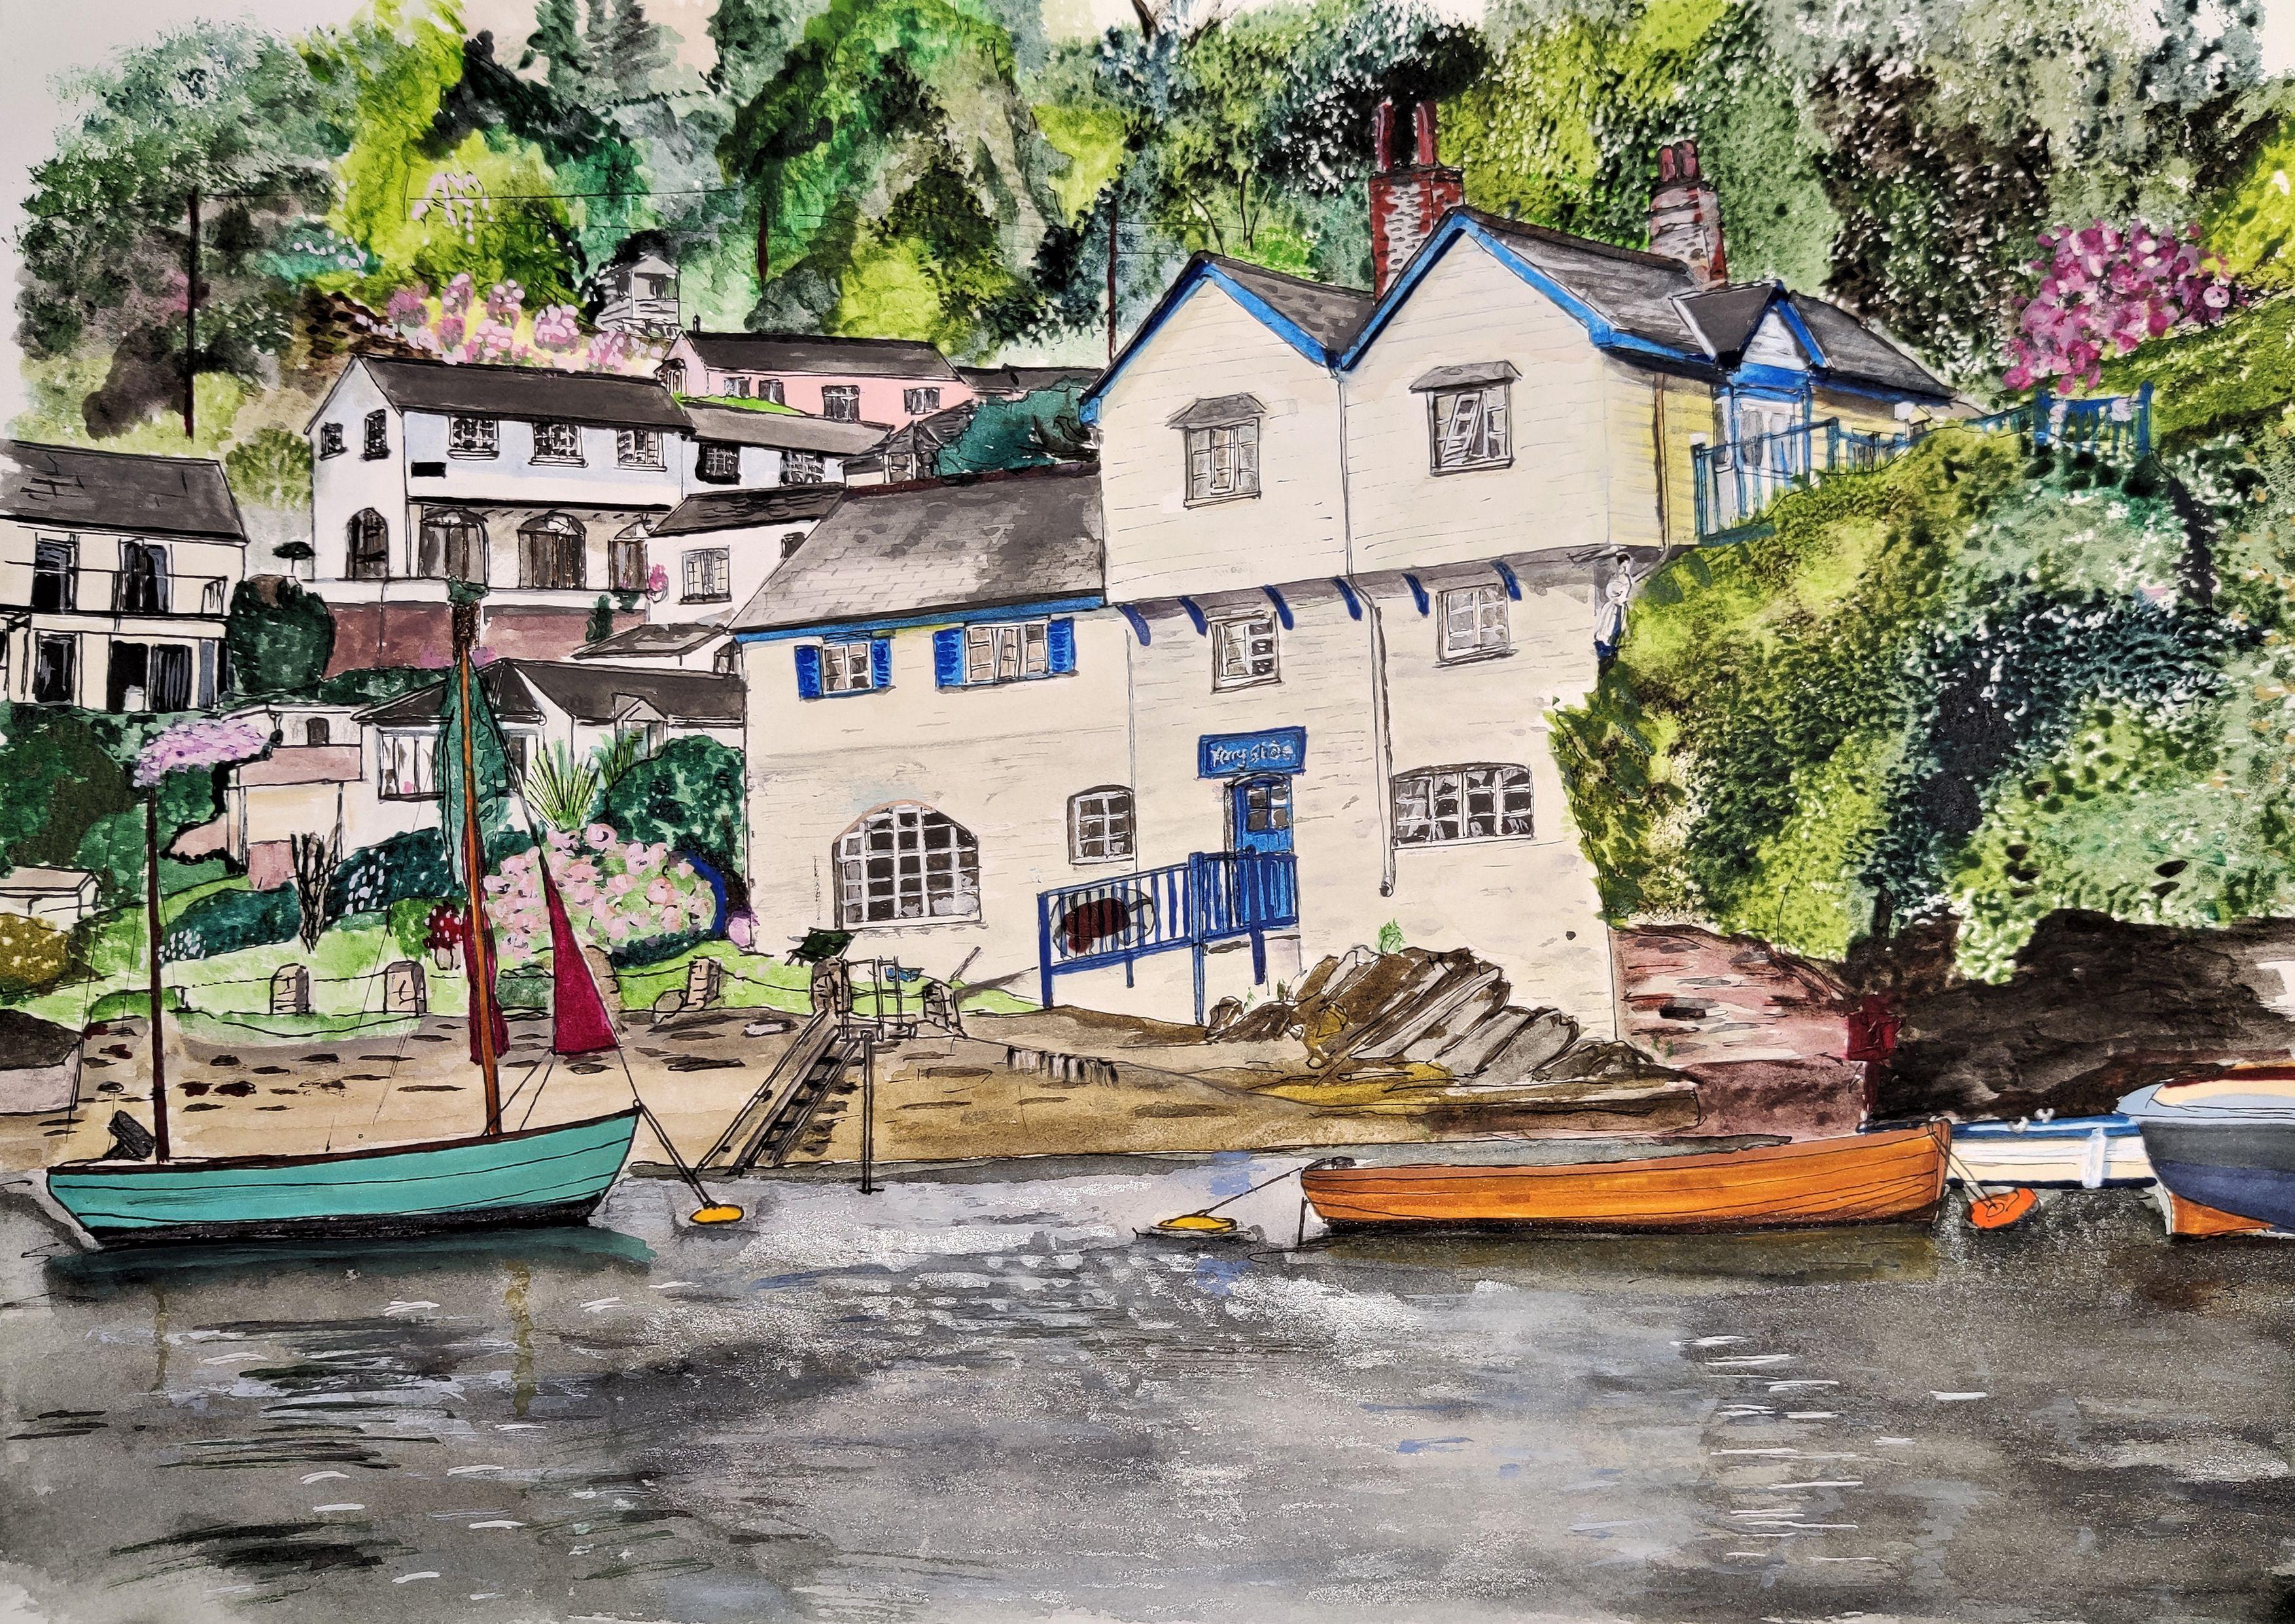 Ferryside, Boddinick, Cornwall, Painting, Watercolor on Watercolor Paper - Art by James Presley